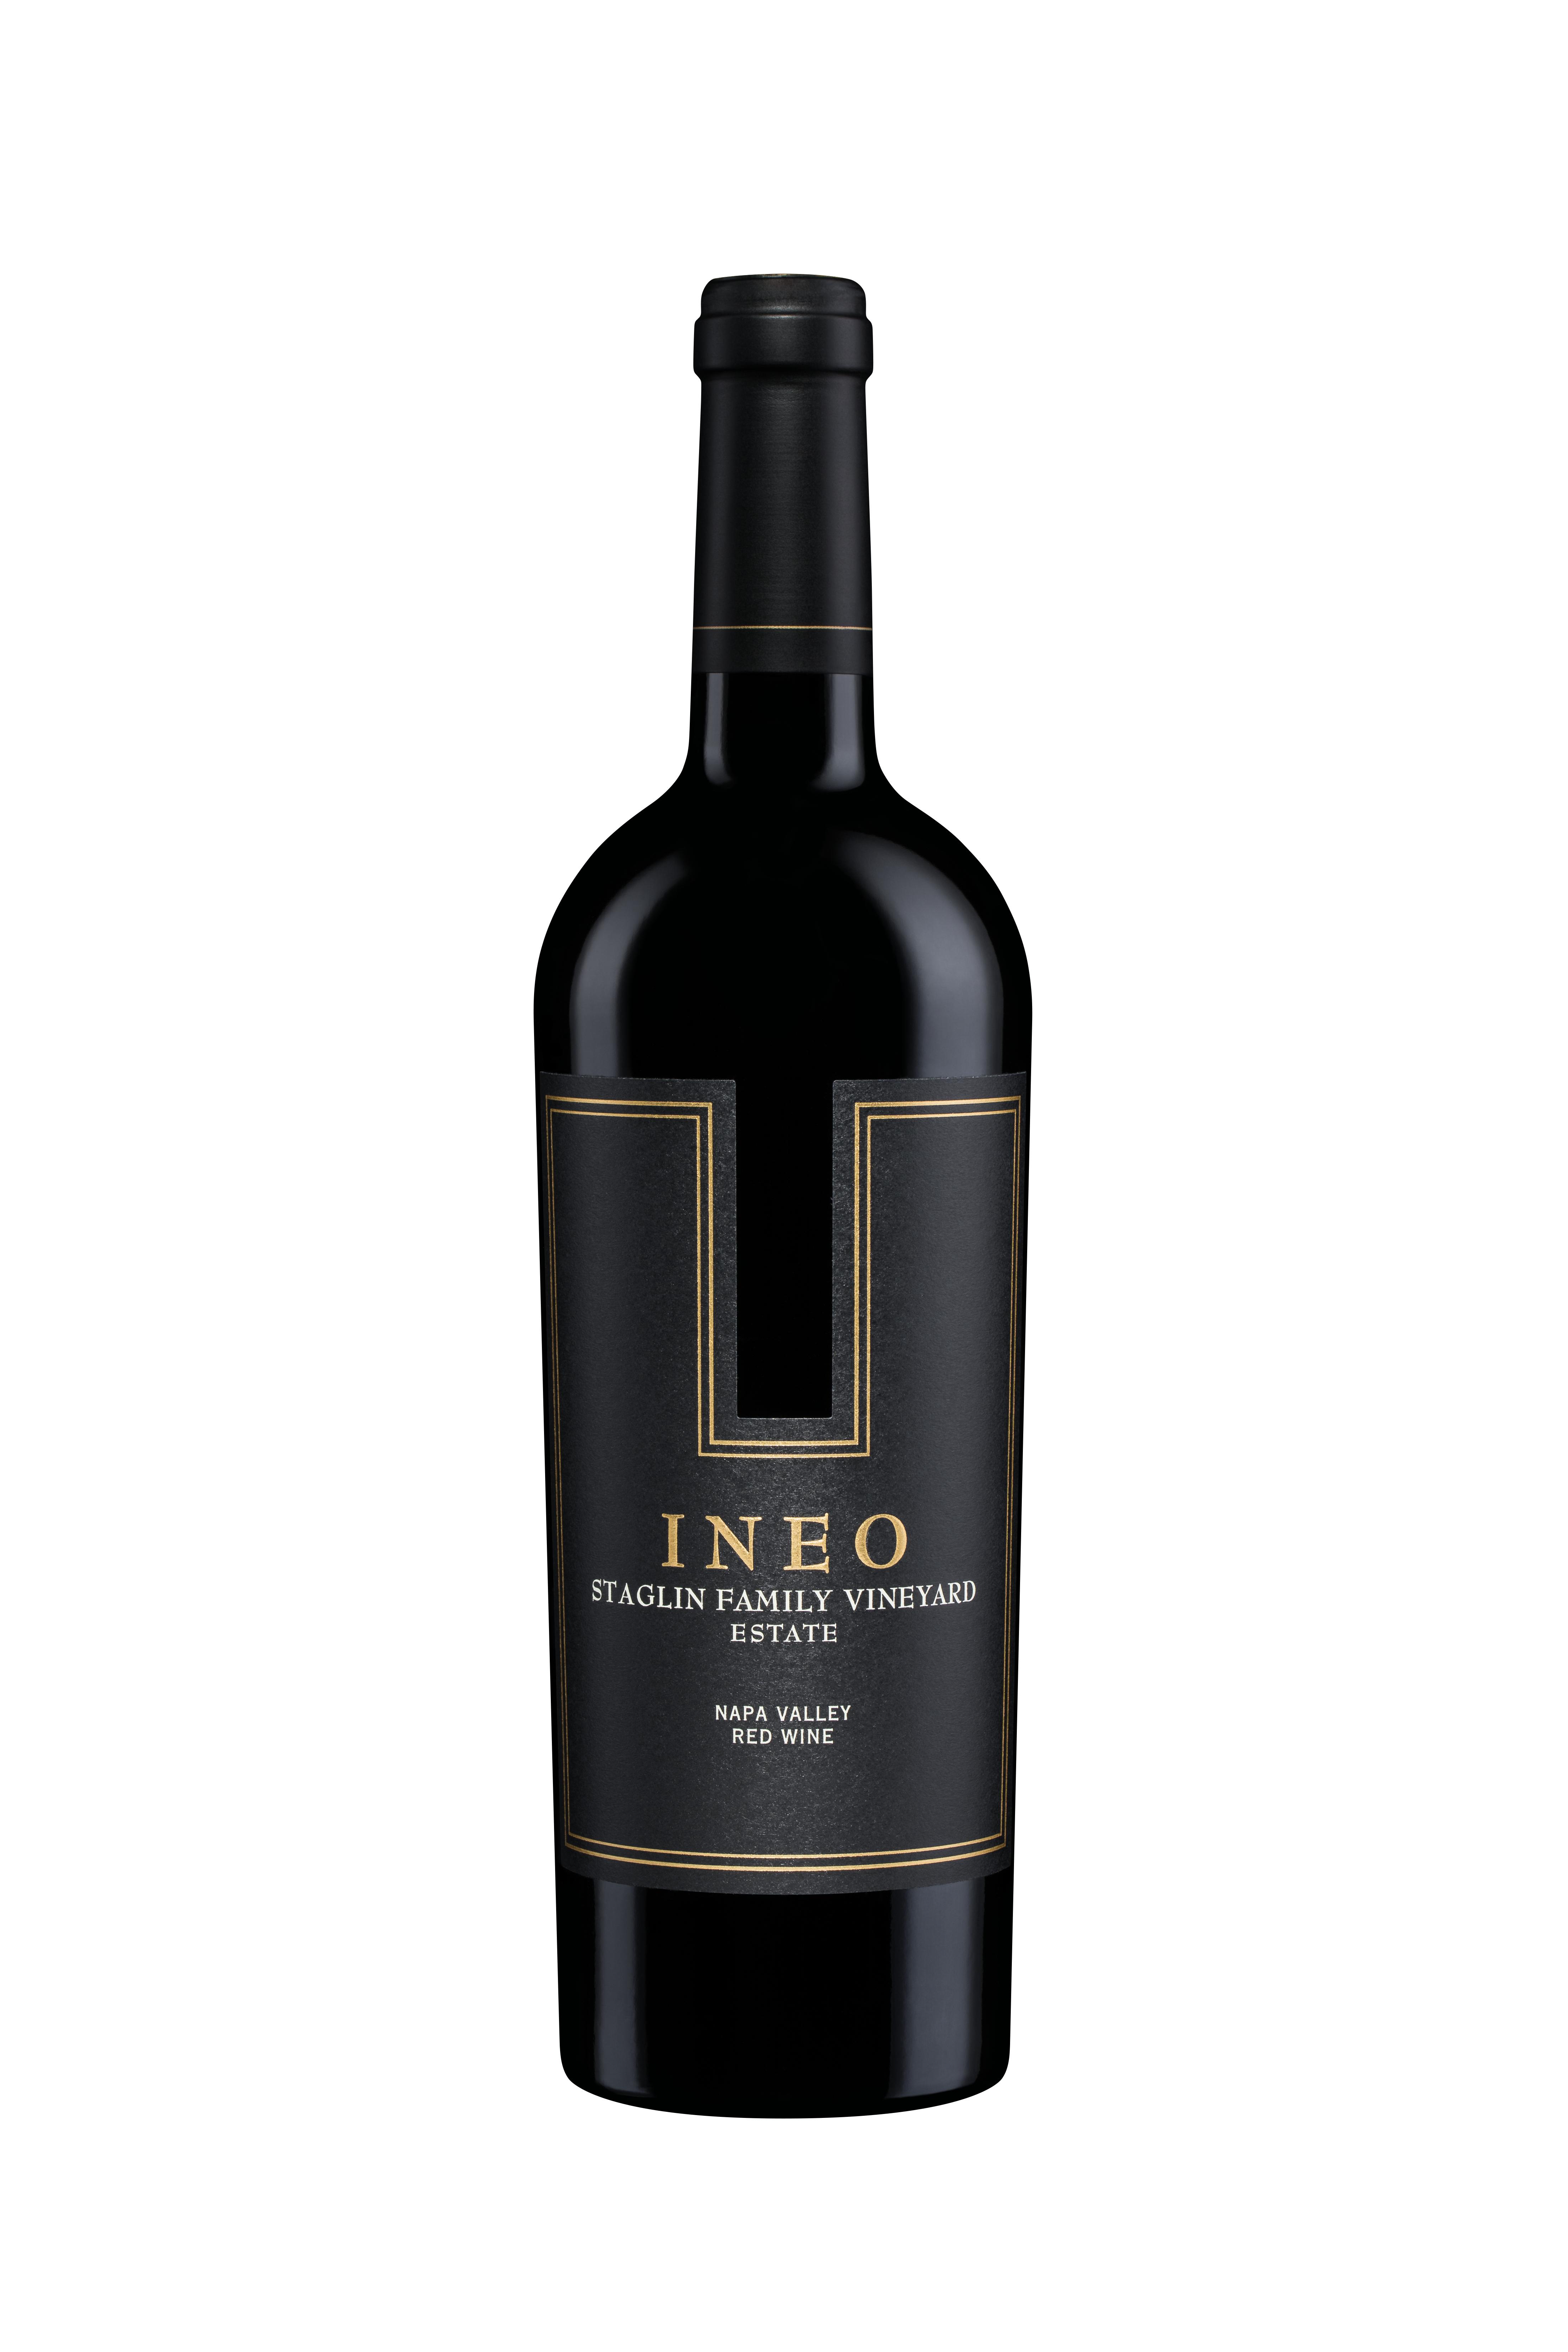 Product Image for Staglin Family Estate INEO 2018 - 750 ml